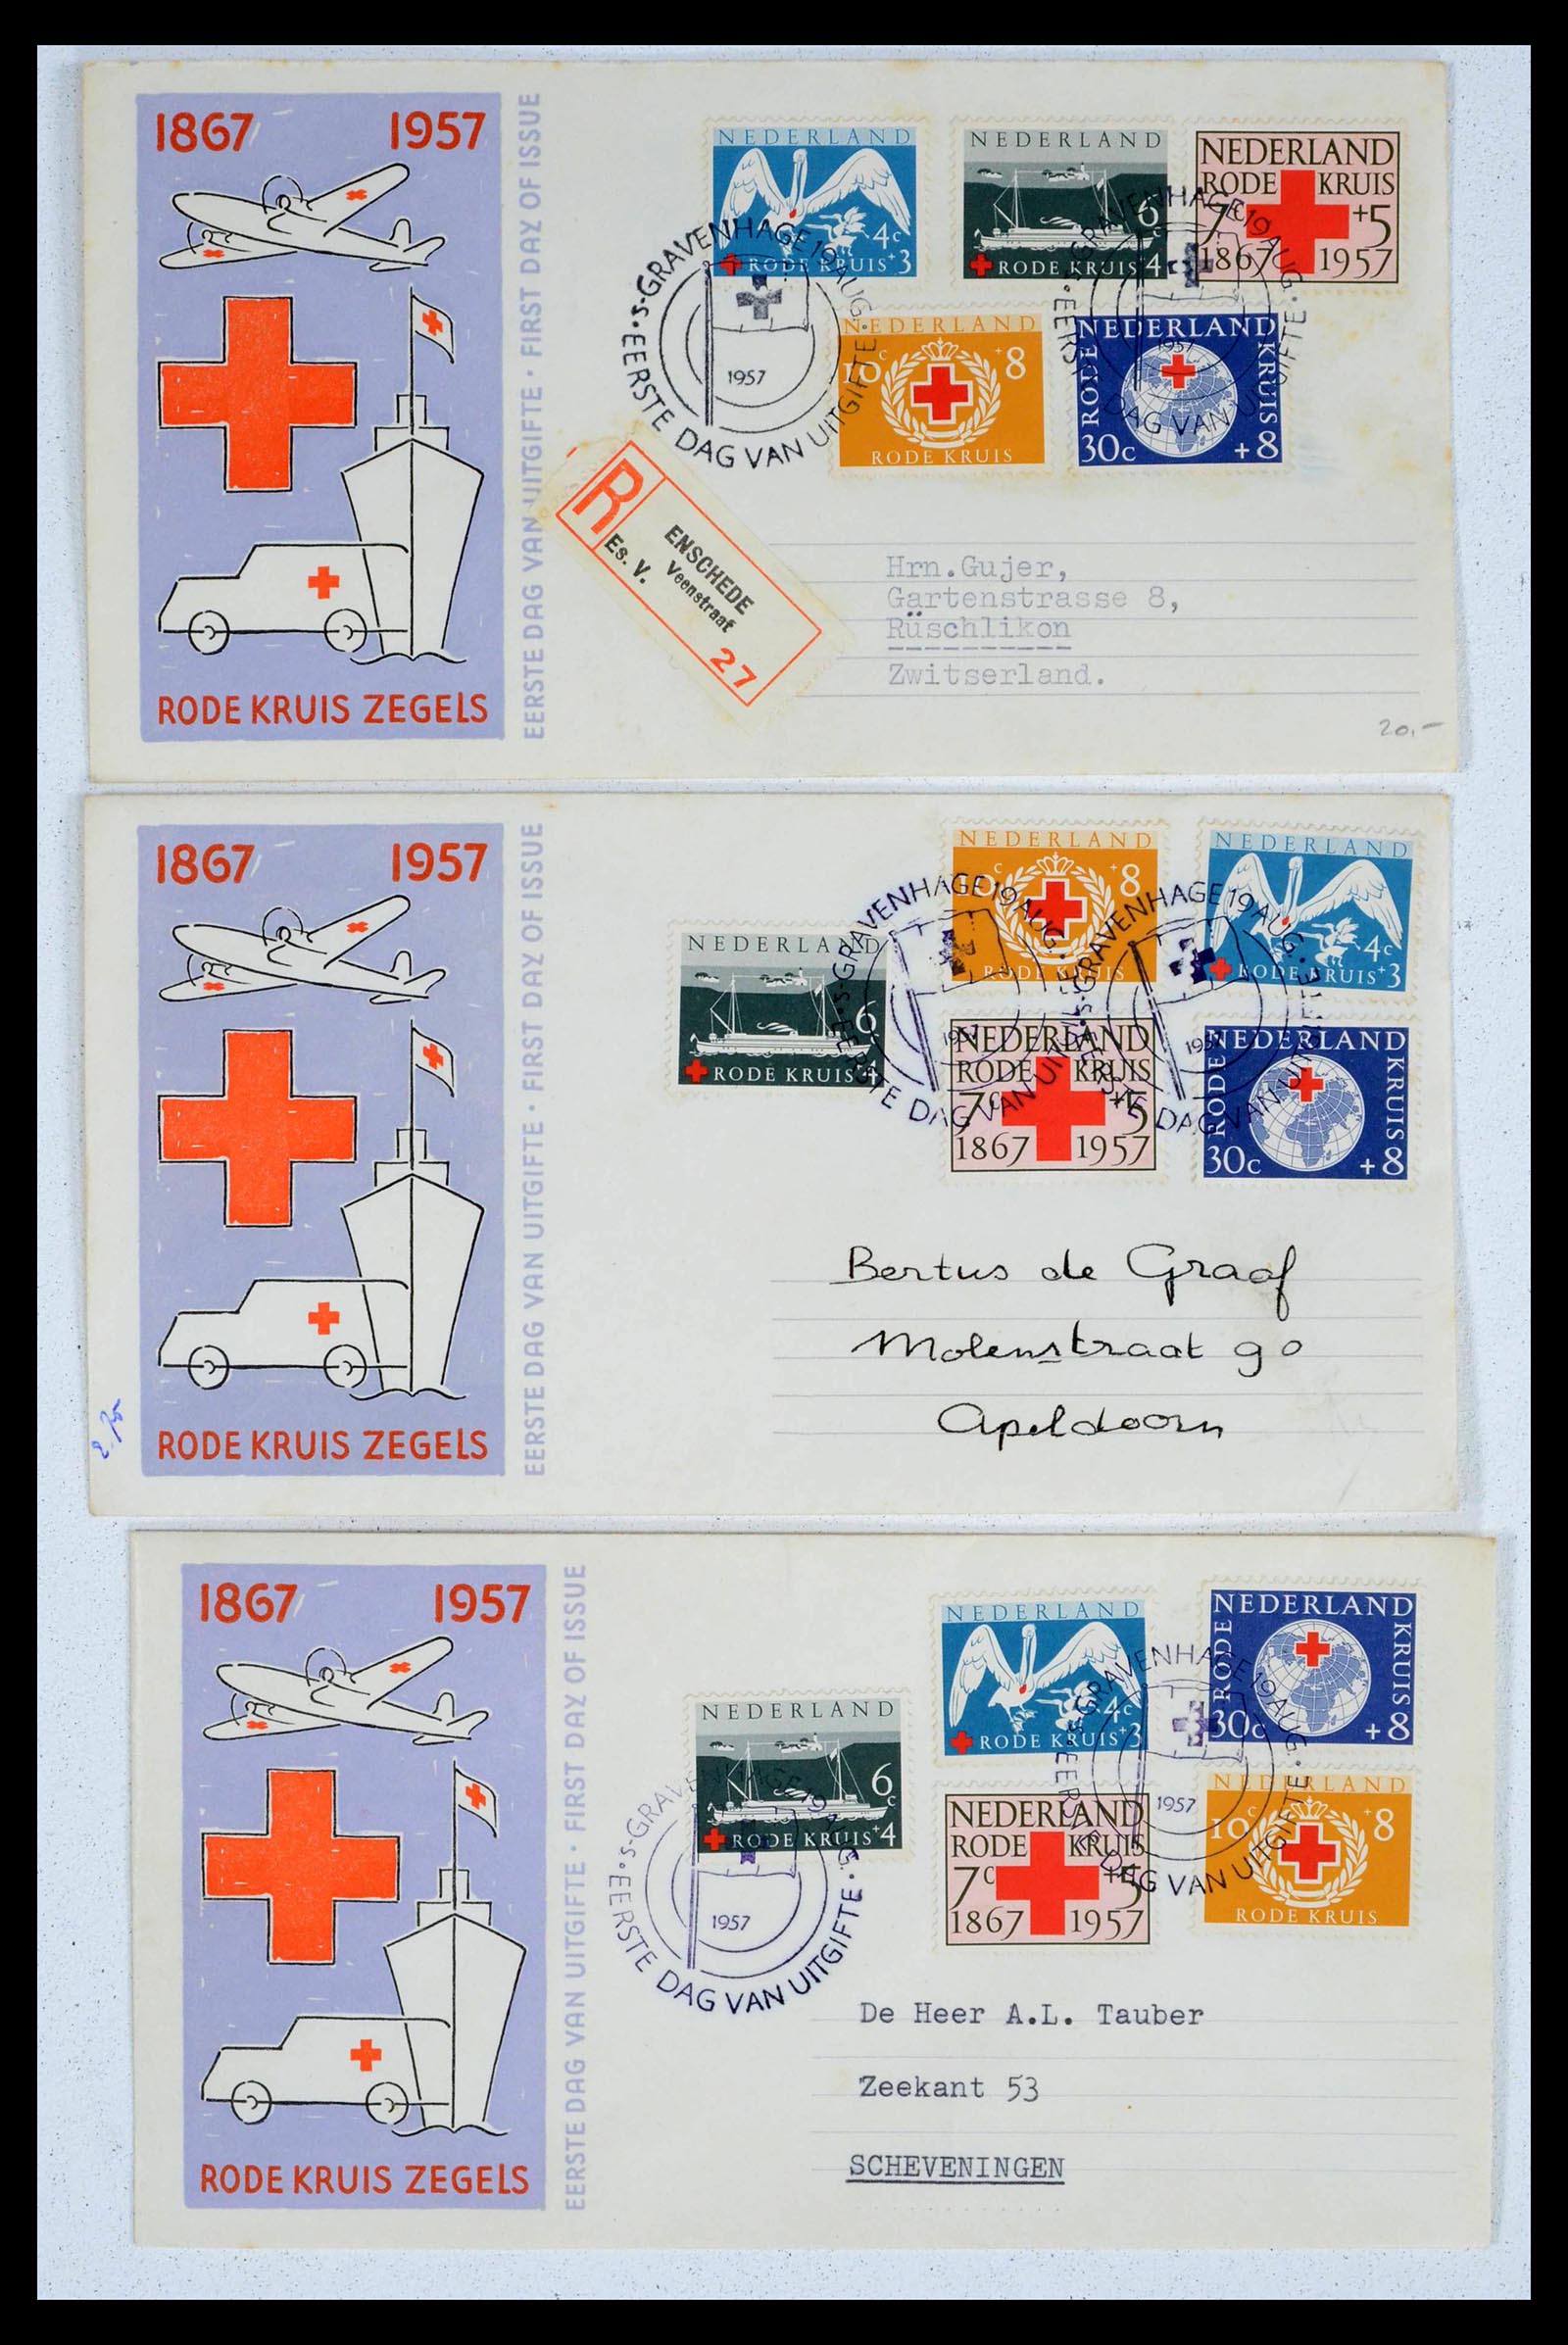 39474 0017 - Stamp collection 39474 Netherlands FDC's 1950-1960.